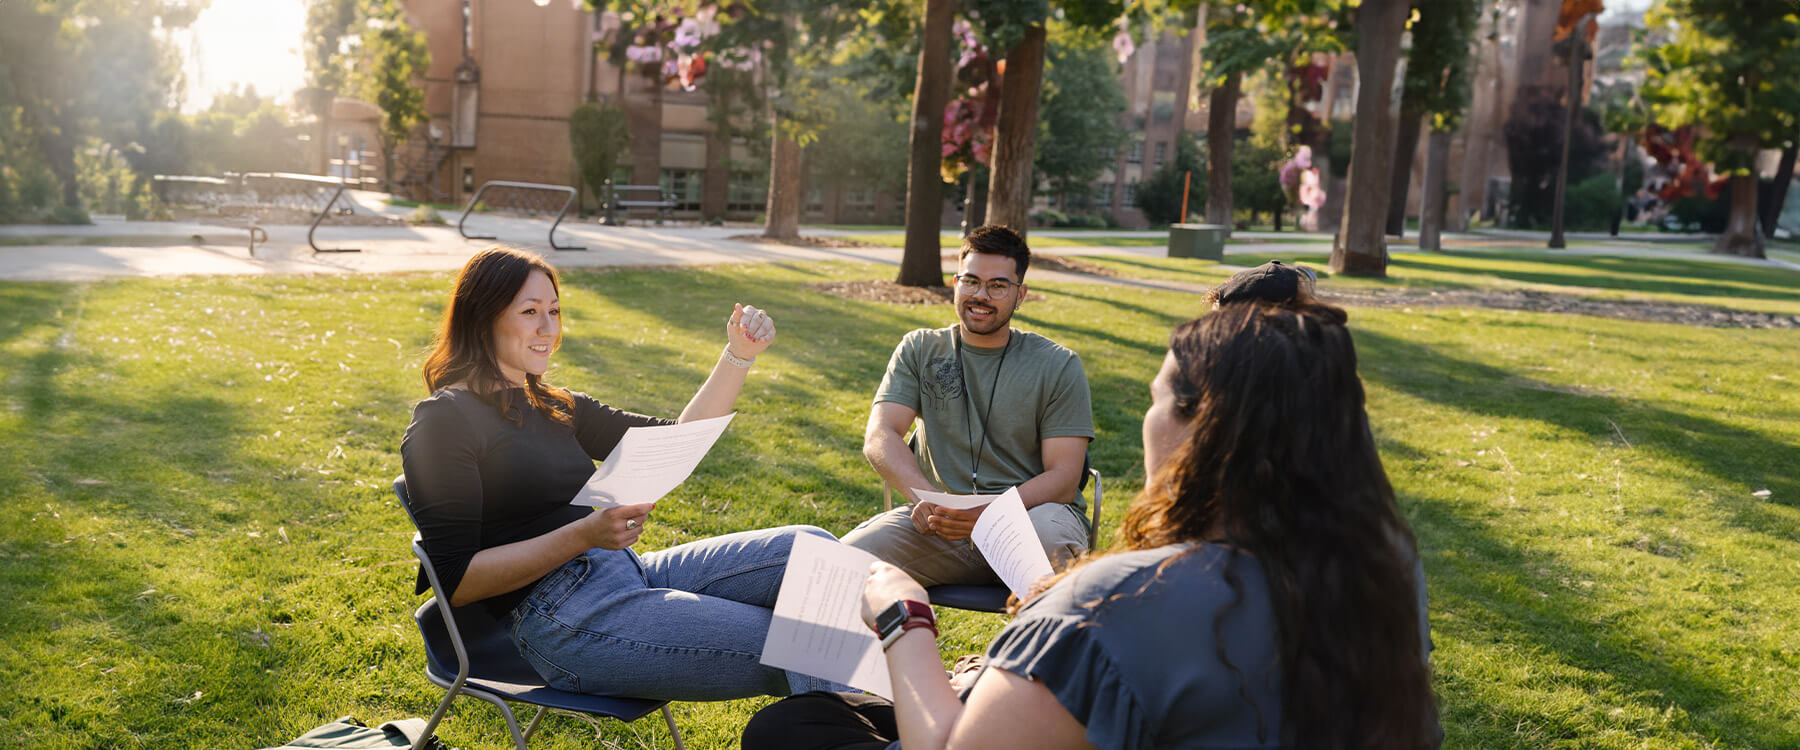 Four students sit outdoors in camp chairs, smiling and holding papers, with trees and buildings in the background.